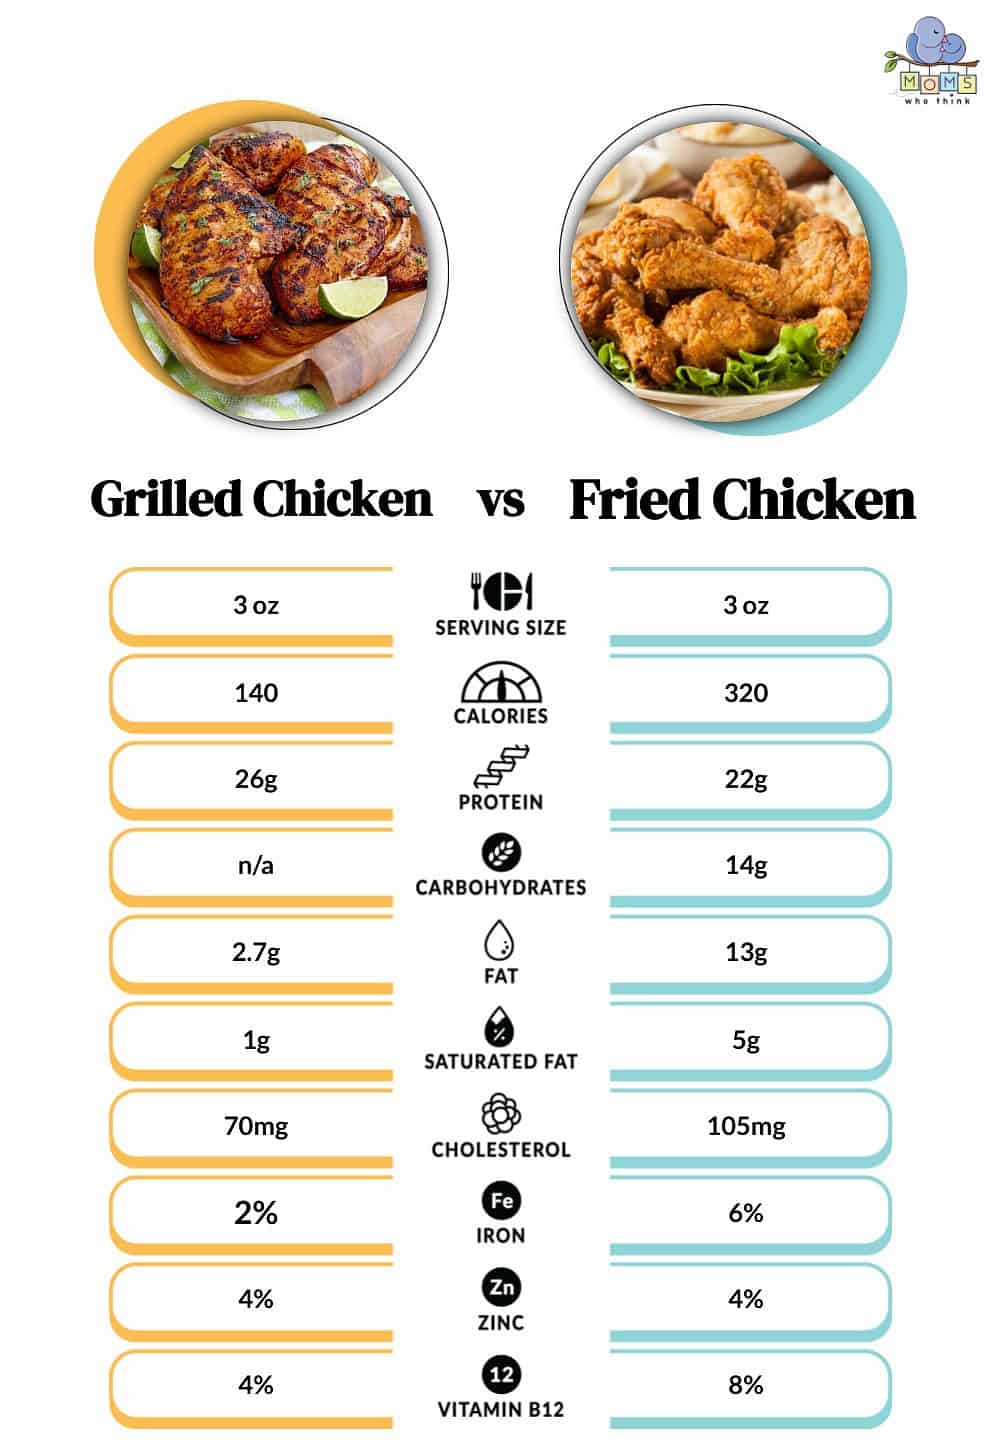 Grilled Chicken vs Fried Chicken Nutritional Facts